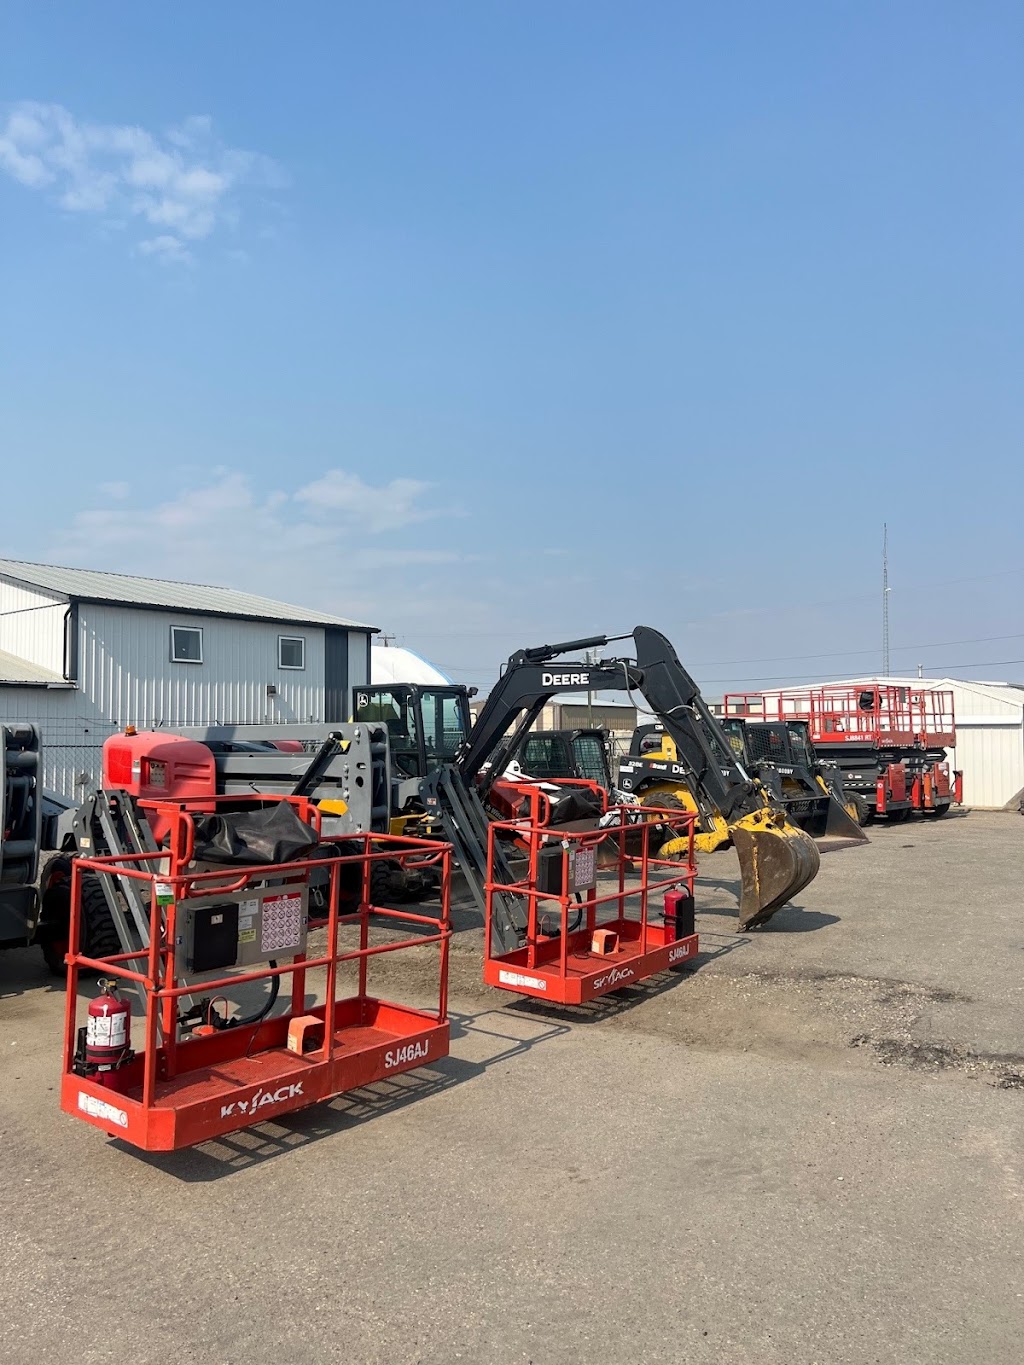 All Choice Rentals Ltd. | 6214 46 St, Olds, AB T4H 1M6, Canada | Phone: (403) 556-7717